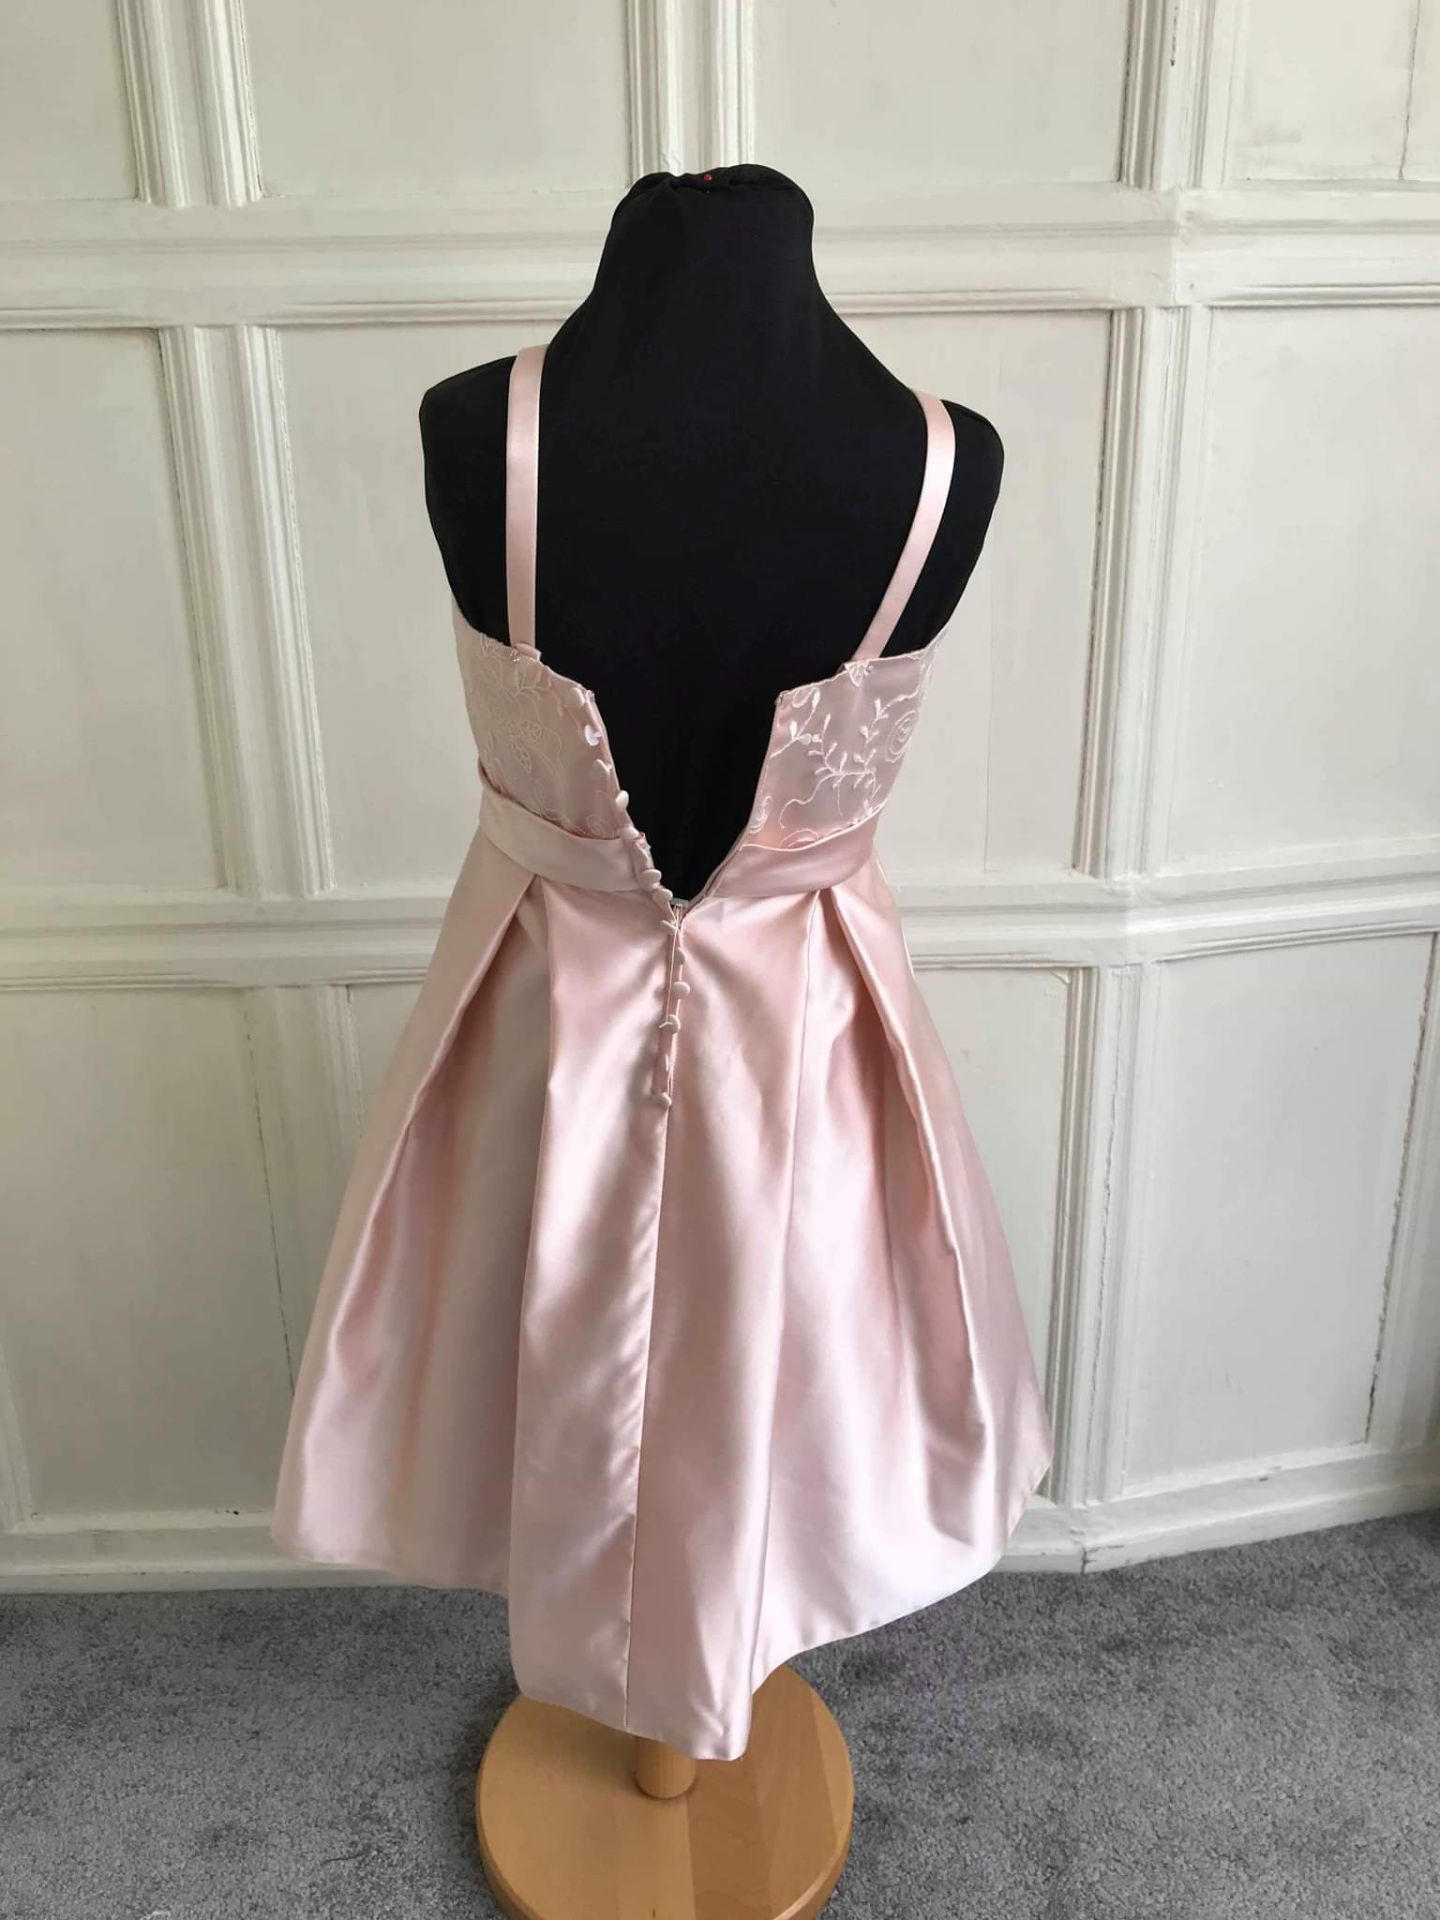 Pink Mikado Prom Or Party Dress Age 4. - Image 2 of 3